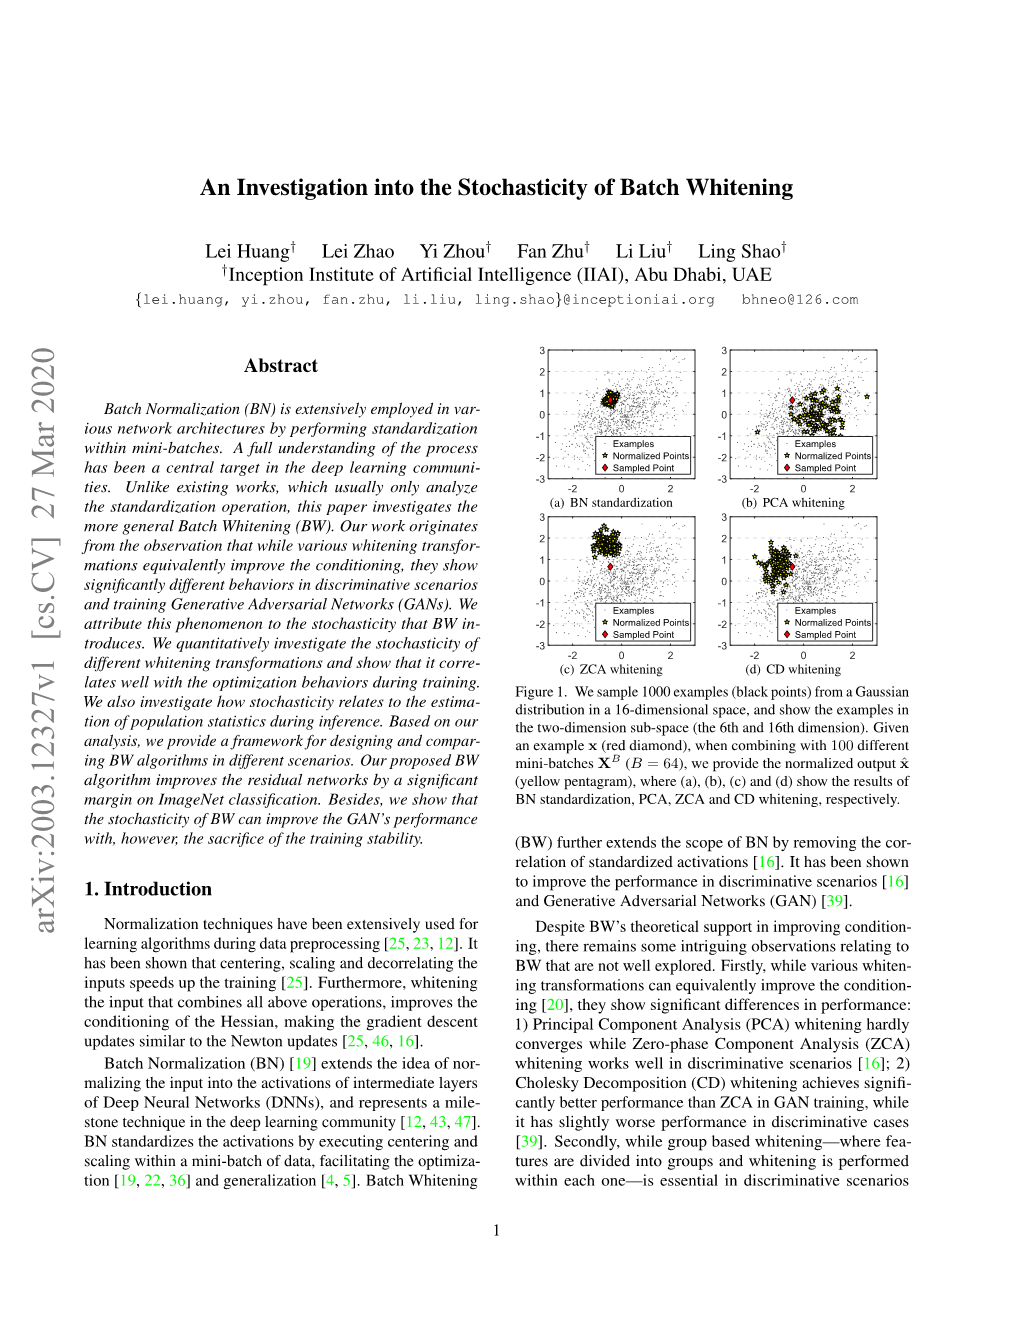 Arxiv:2003.12327V1 [Cs.CV] 27 Mar 2020 Despite BW’S Theoretical Support in Improving Condition- Learning Algorithms During Data Preprocessing [25, 23, 12]